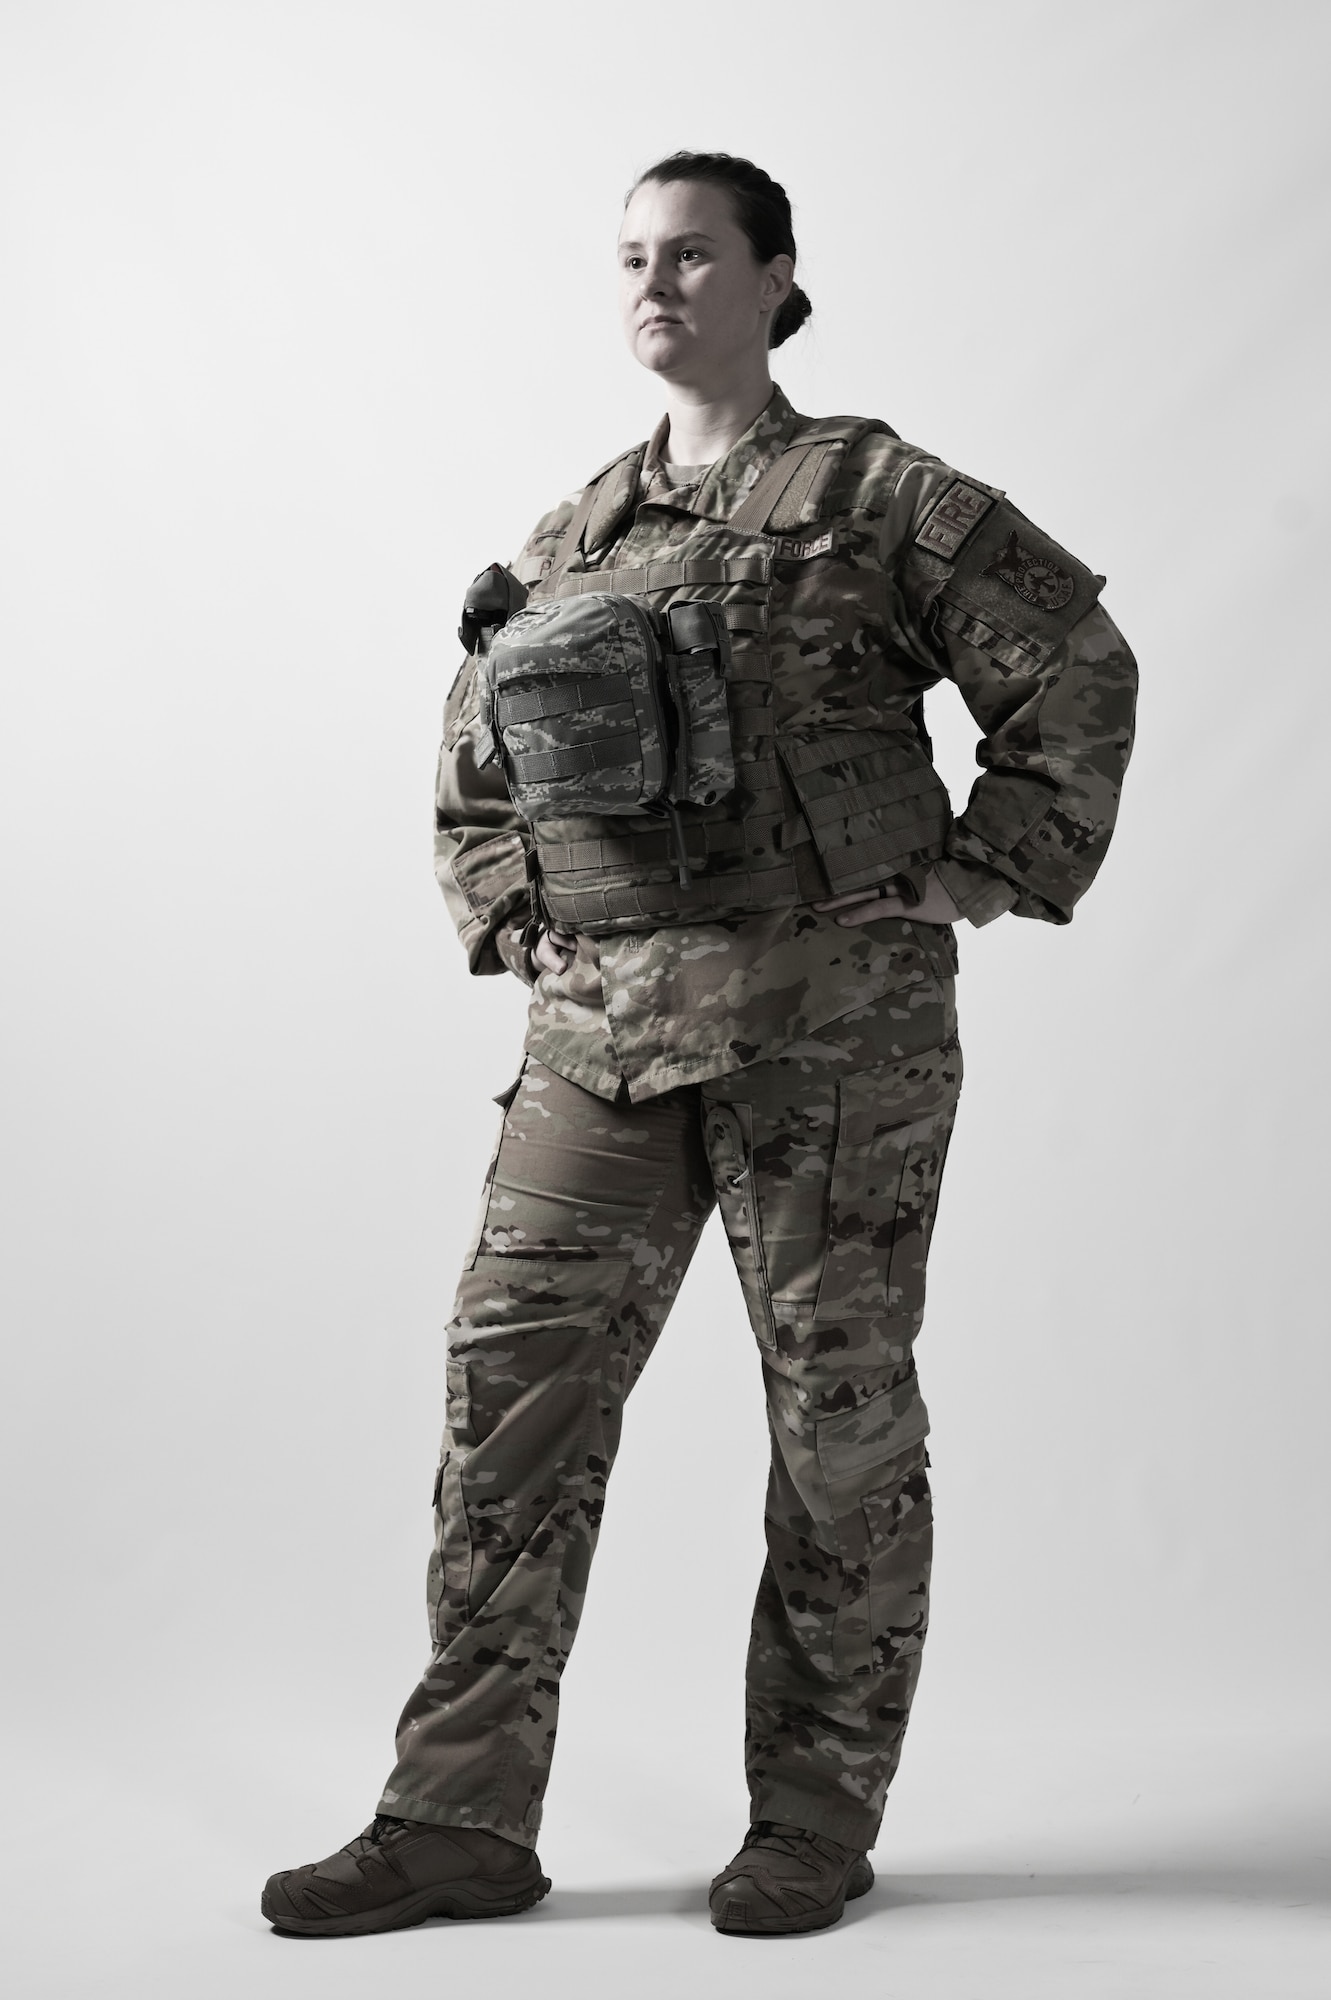 U.S. Air Force Tech. Sgt. Alyssa Poyner, a 1st Special Operations Civil Engineer Squadron lead firefighter, poses for a photo at Hurlburt Field, Florida, Jan. 25, 2024. Poyner’s background in medical services, Tactical Combat Casualty Care training, fire and emergency services has equipped her to train numerous members within the Santa Rosa School District. (U.S. Air Force photo by Senior Airman Alysa Calvarese)